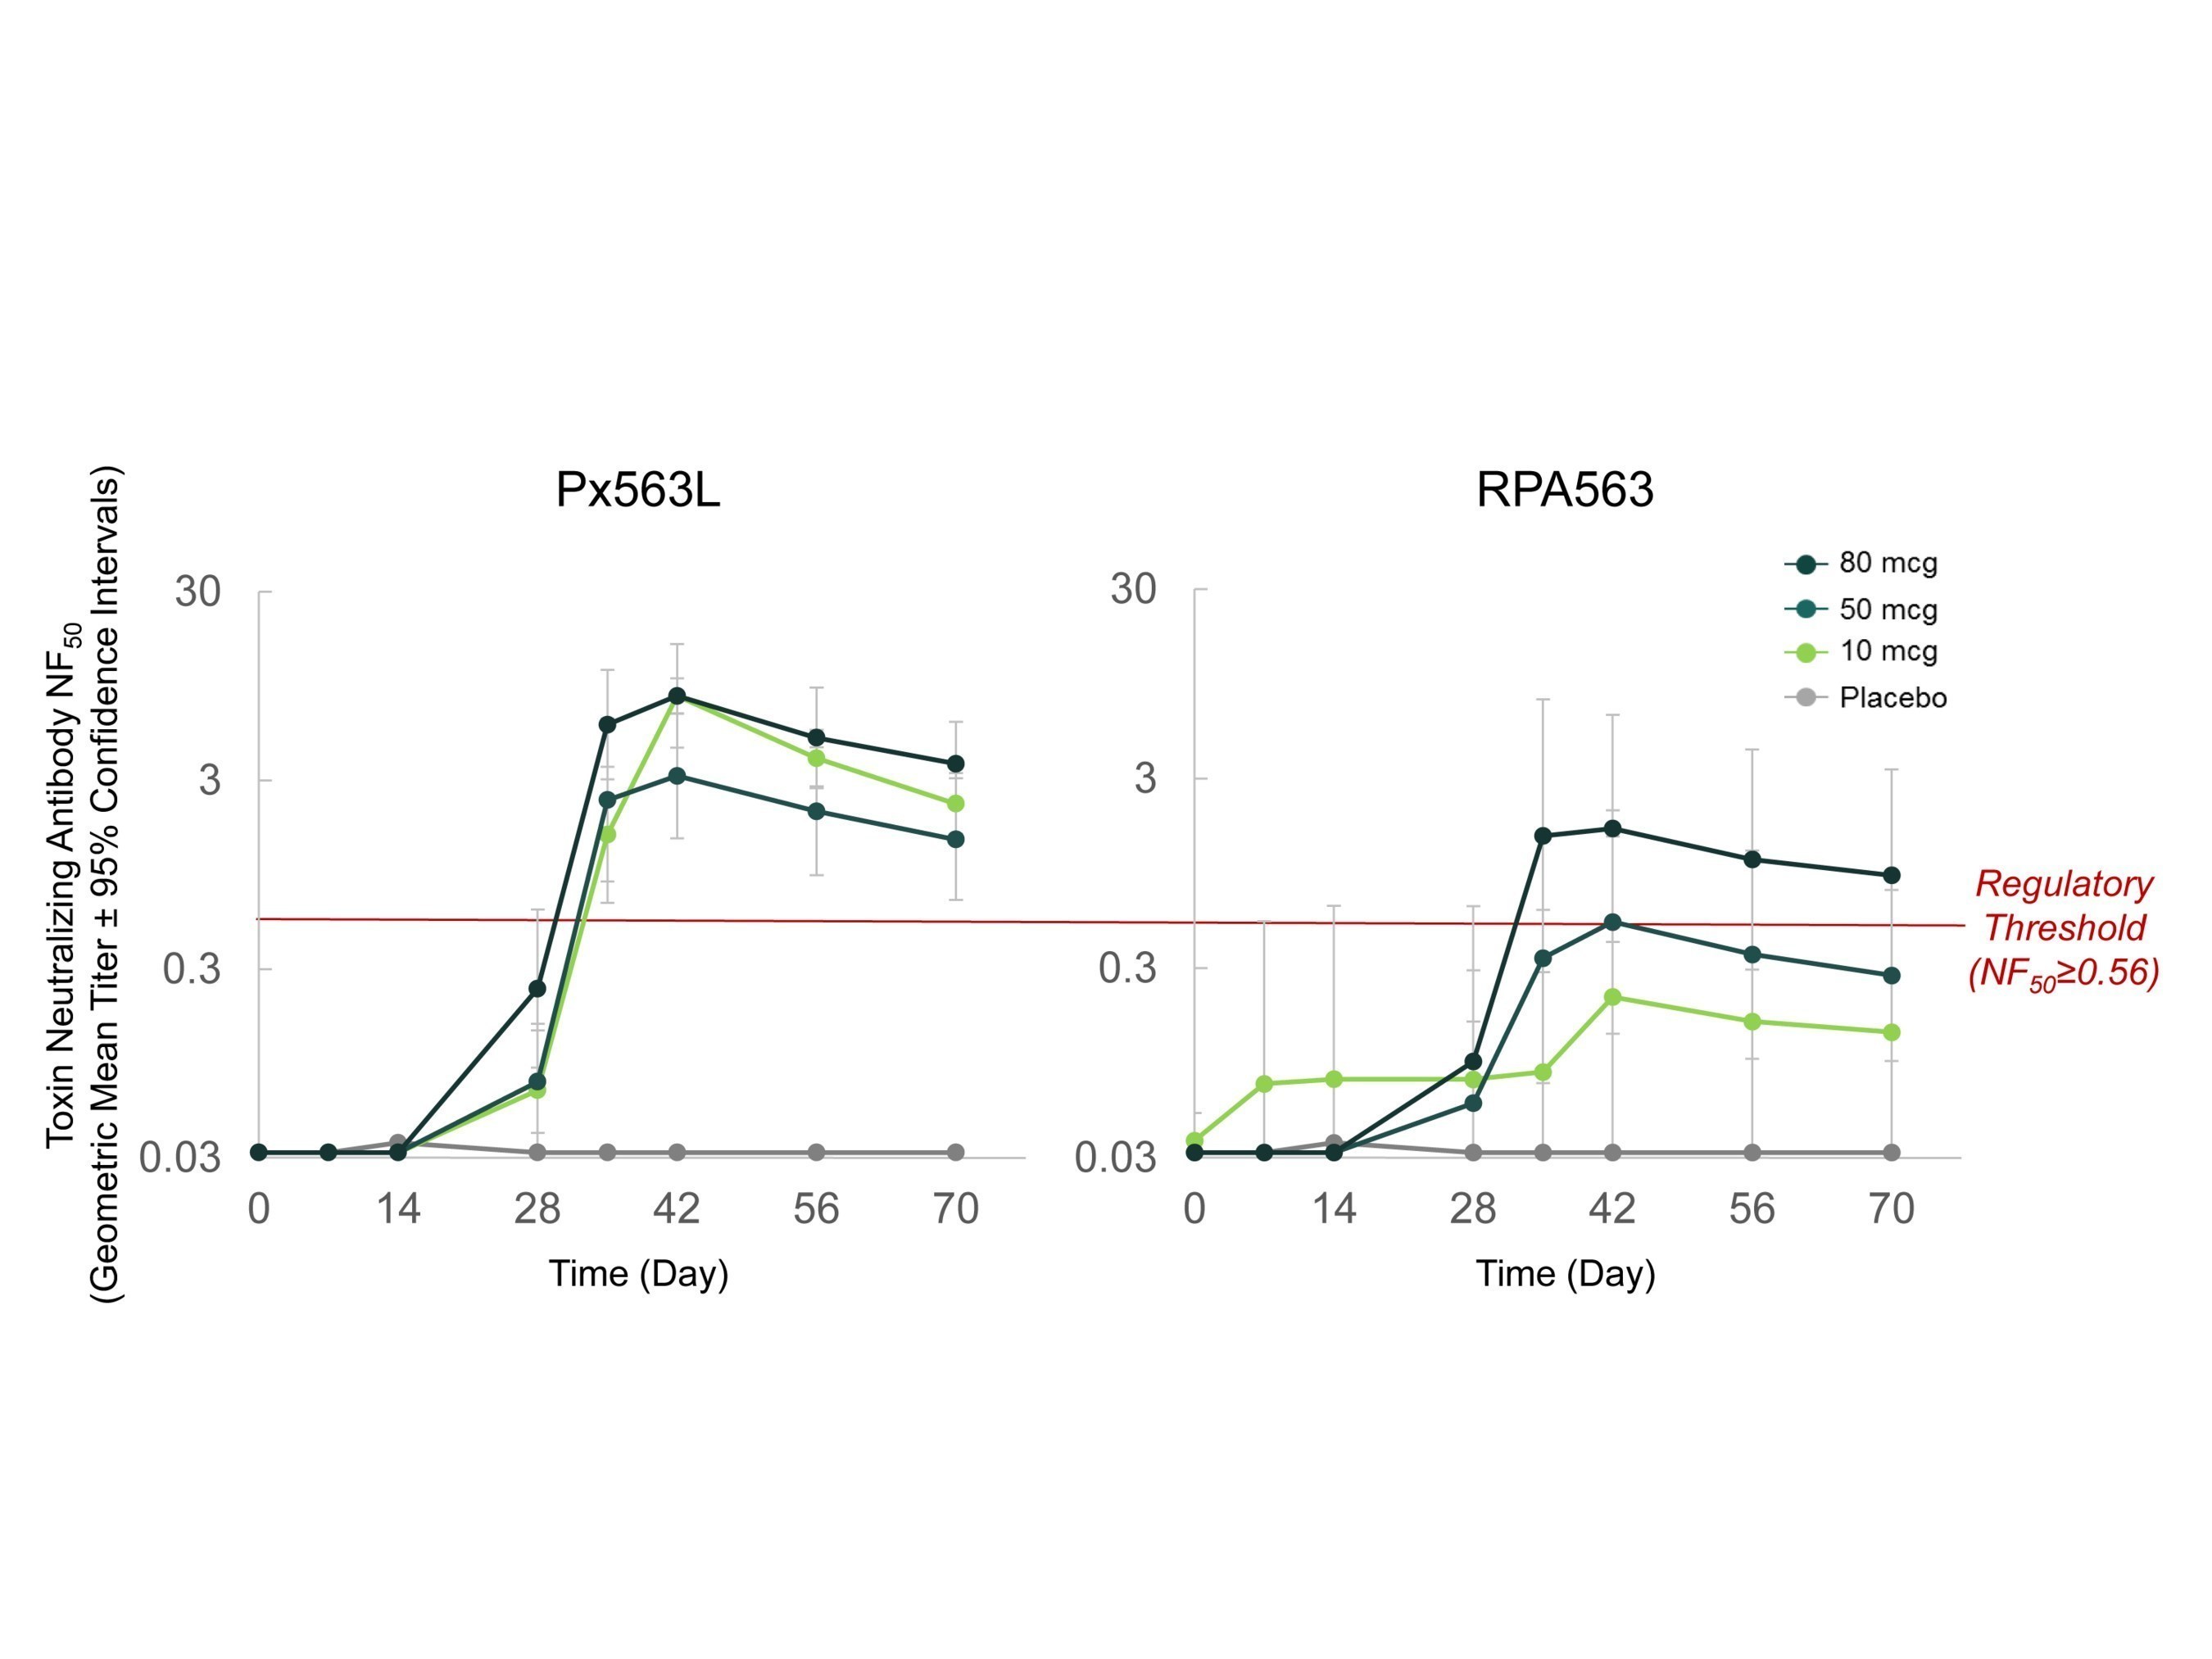 Figure 1: TNA NF50 Immunogenicity Response for Px563L, RPA563 and placebo (logarithmic scale)